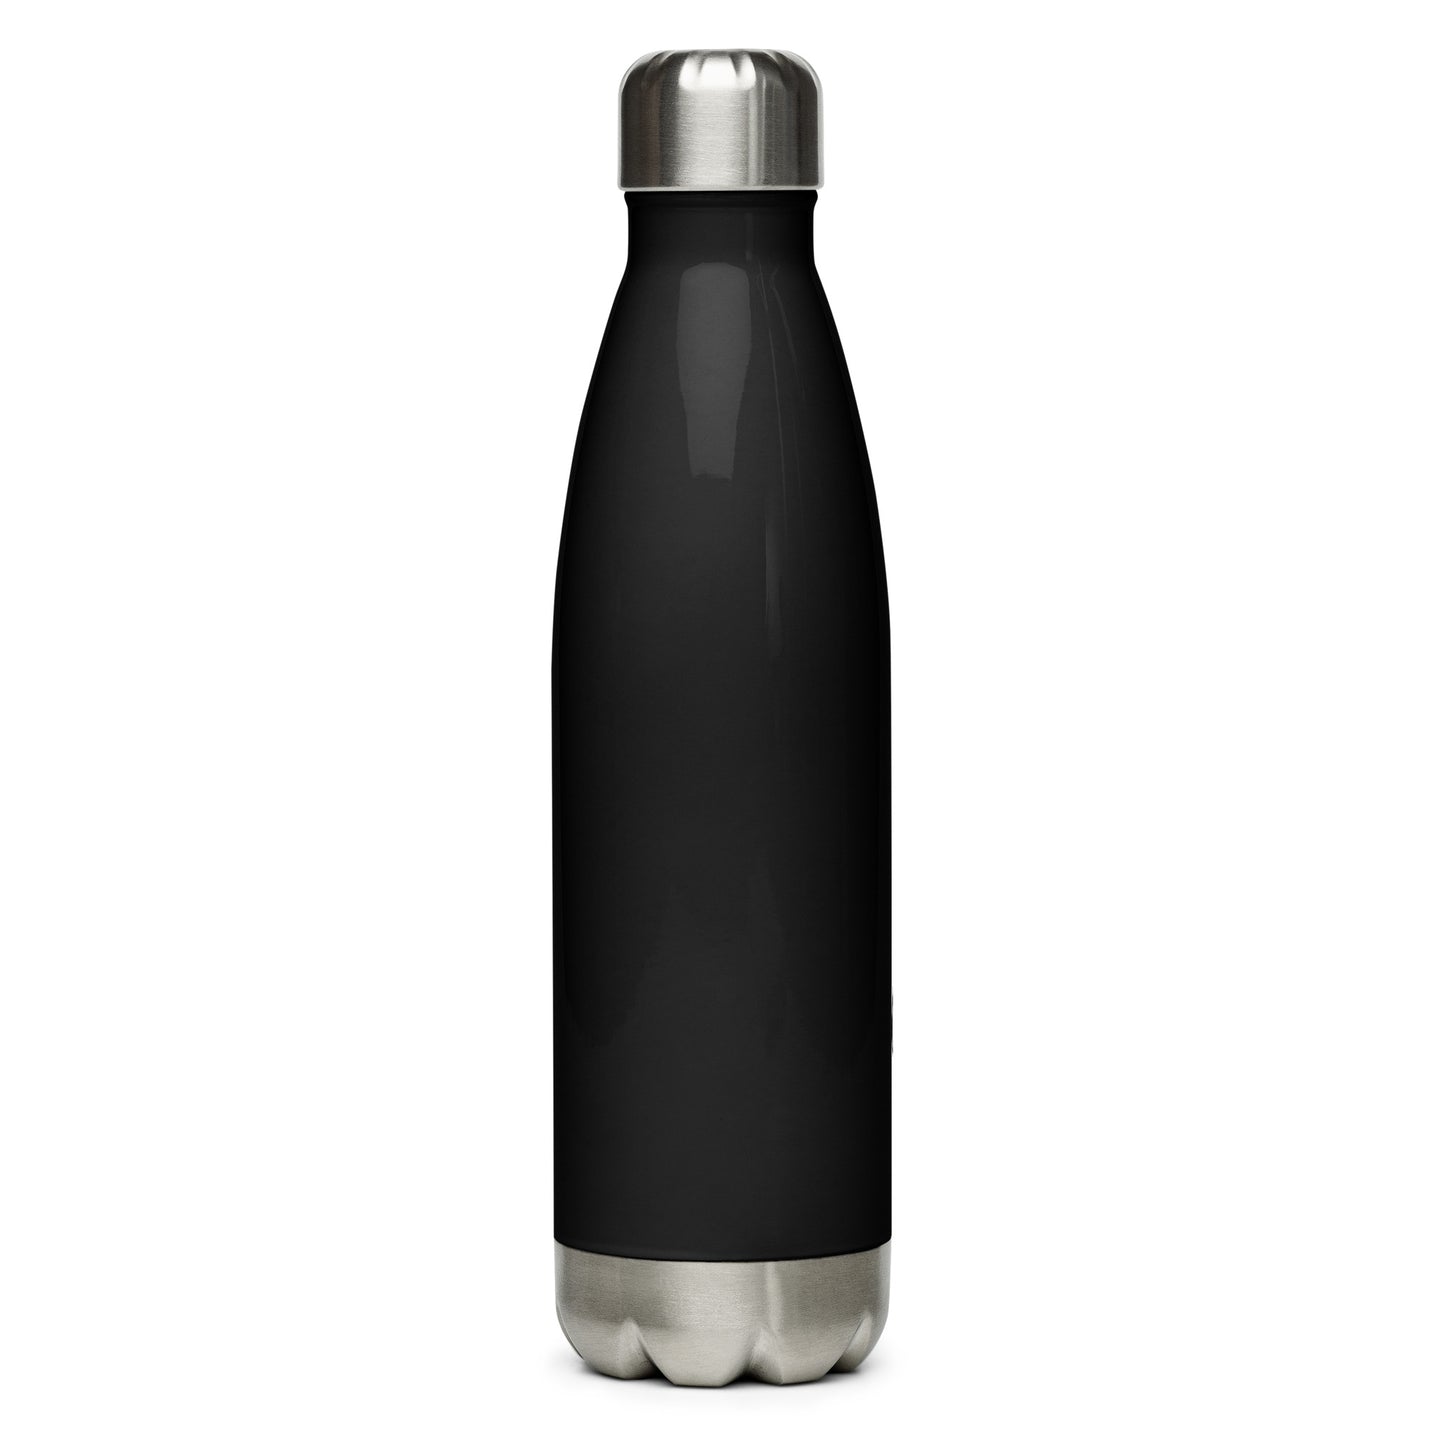 "The Conservative Fisherman" Signature Graphic Stainless Water Bottle